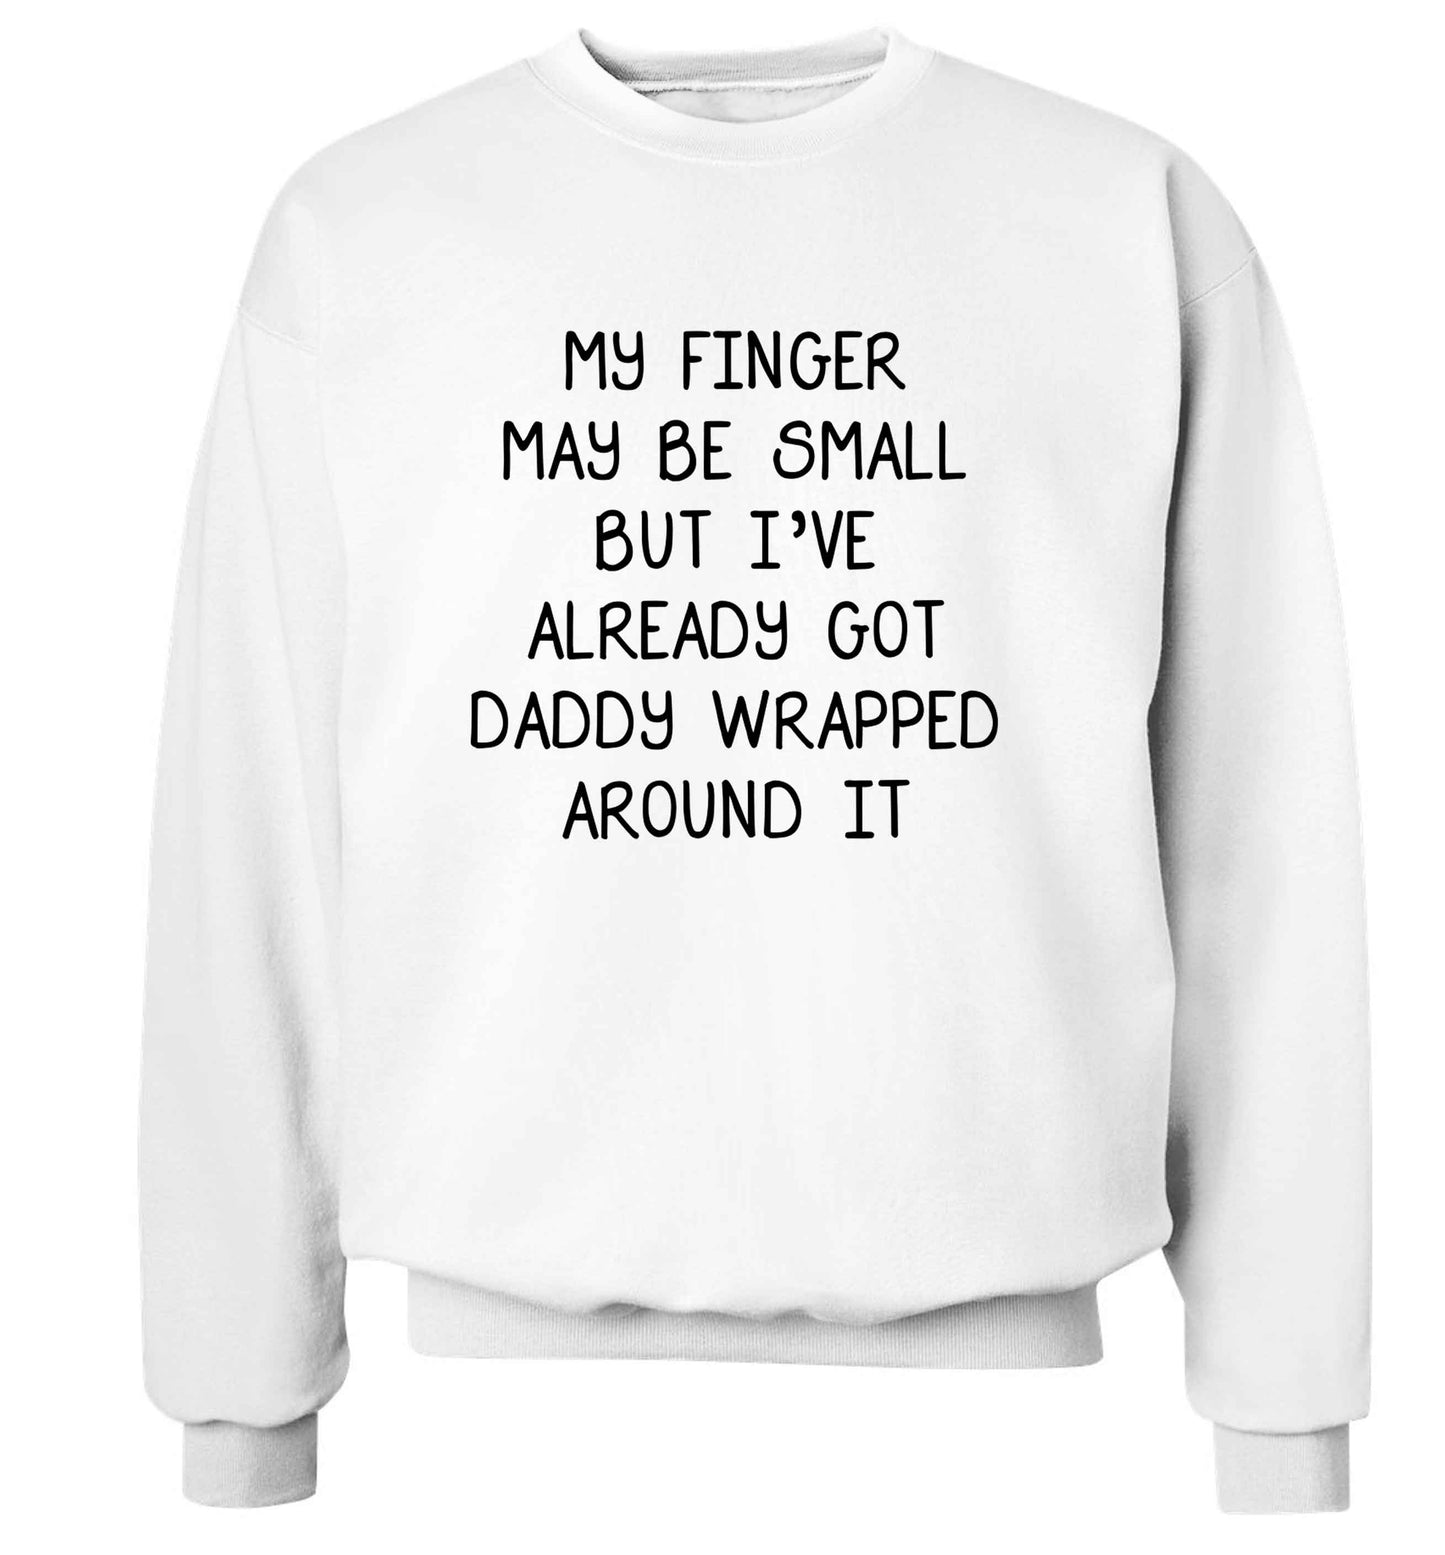 My finger may be small but I've already got daddy wrapped around it adult's unisex white sweater 2XL